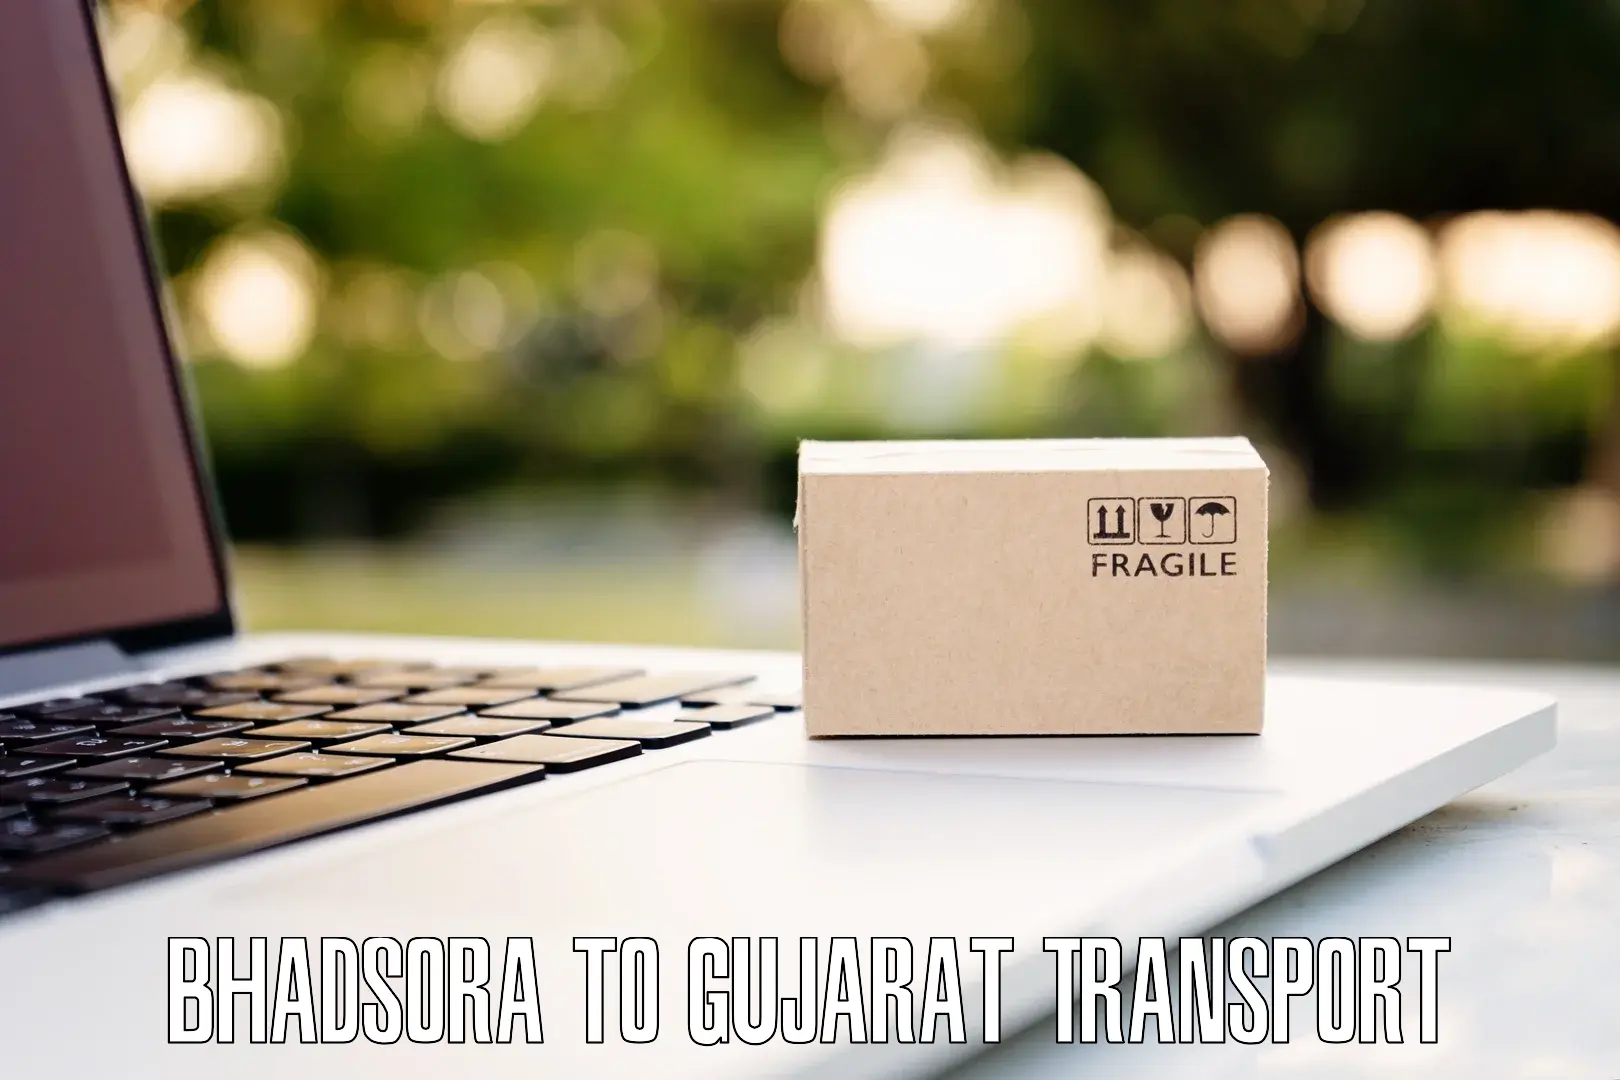 Nationwide transport services Bhadsora to Gujarat